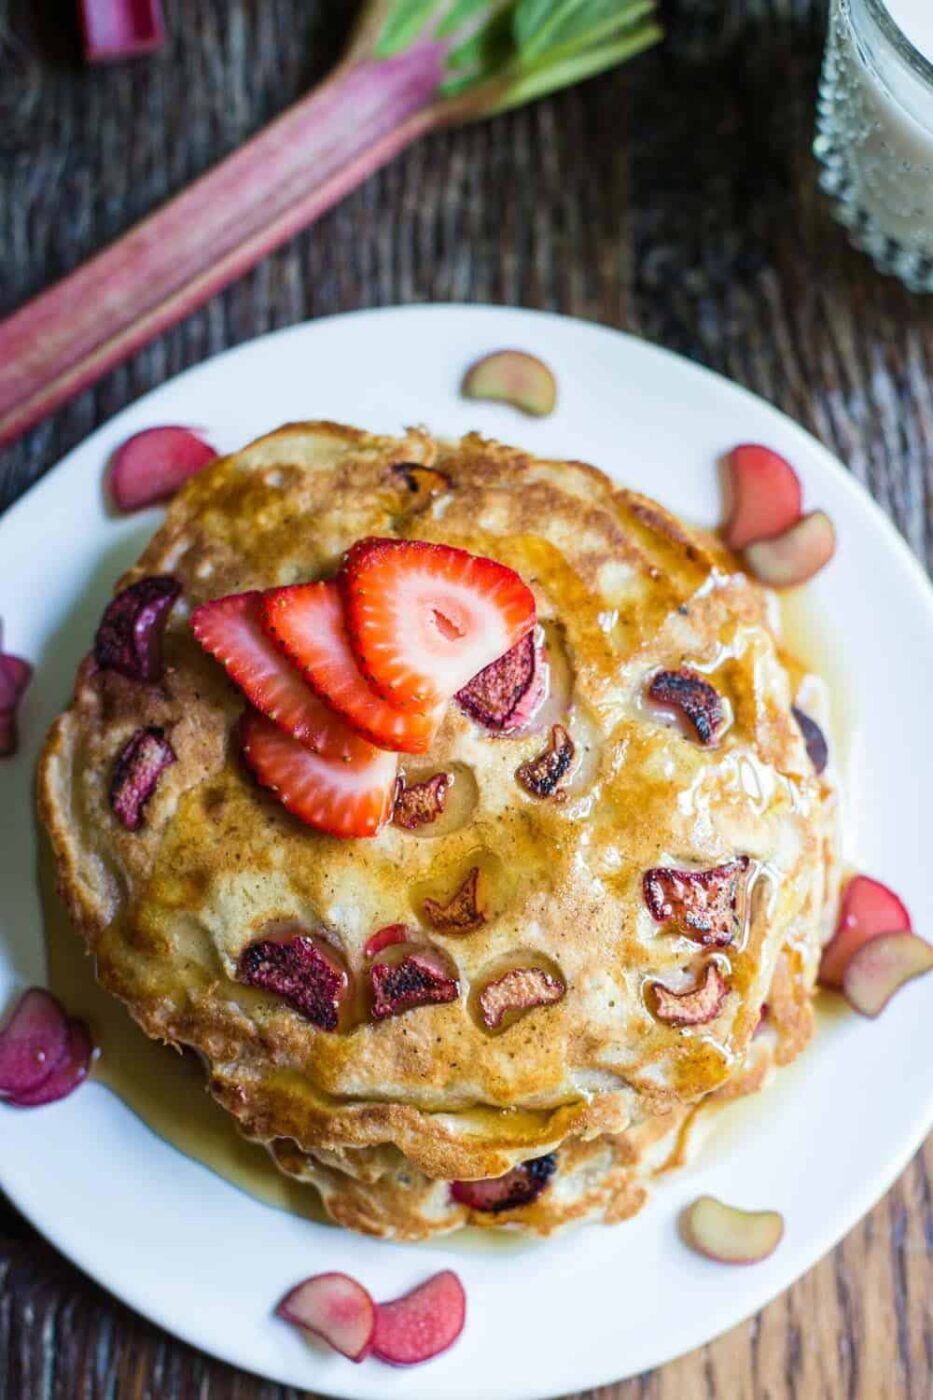 Vegan rhubarb pancakes + 15 Farmers market recipes to make in April! Delicious, vegetarian, (mostly) healthy spring recipes made with fresh, seasonal produce from your local farmers market or CSA bin. Eat local! // Rhubarbarians